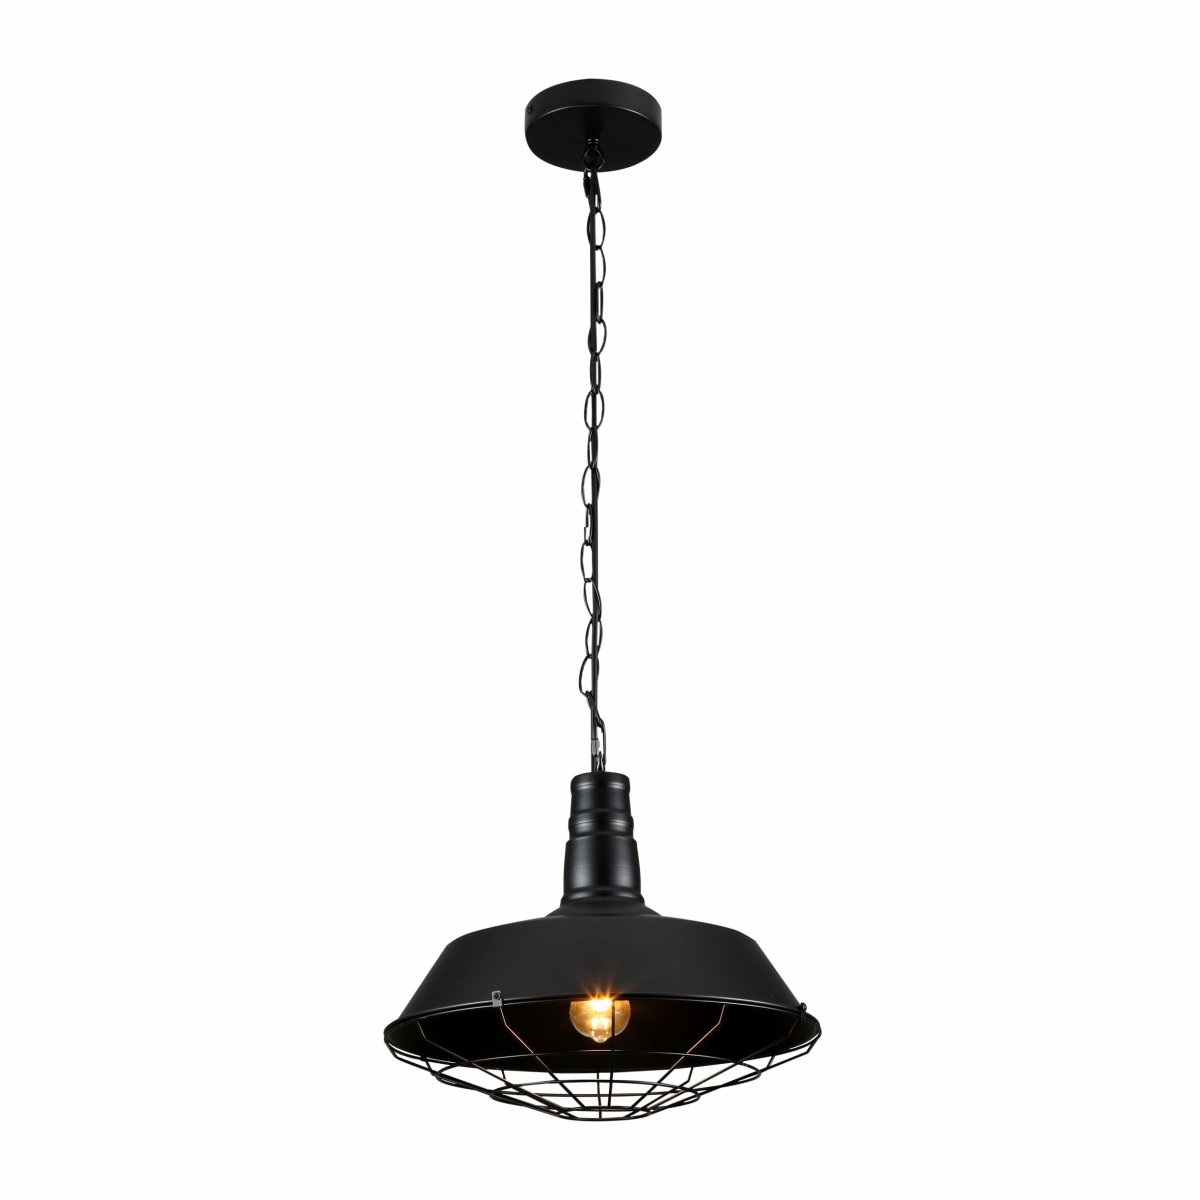 Main image of Black Step Caged Industrial Metal Ceiling Pendant Light with E27 Fitting | TEKLED 150-18362